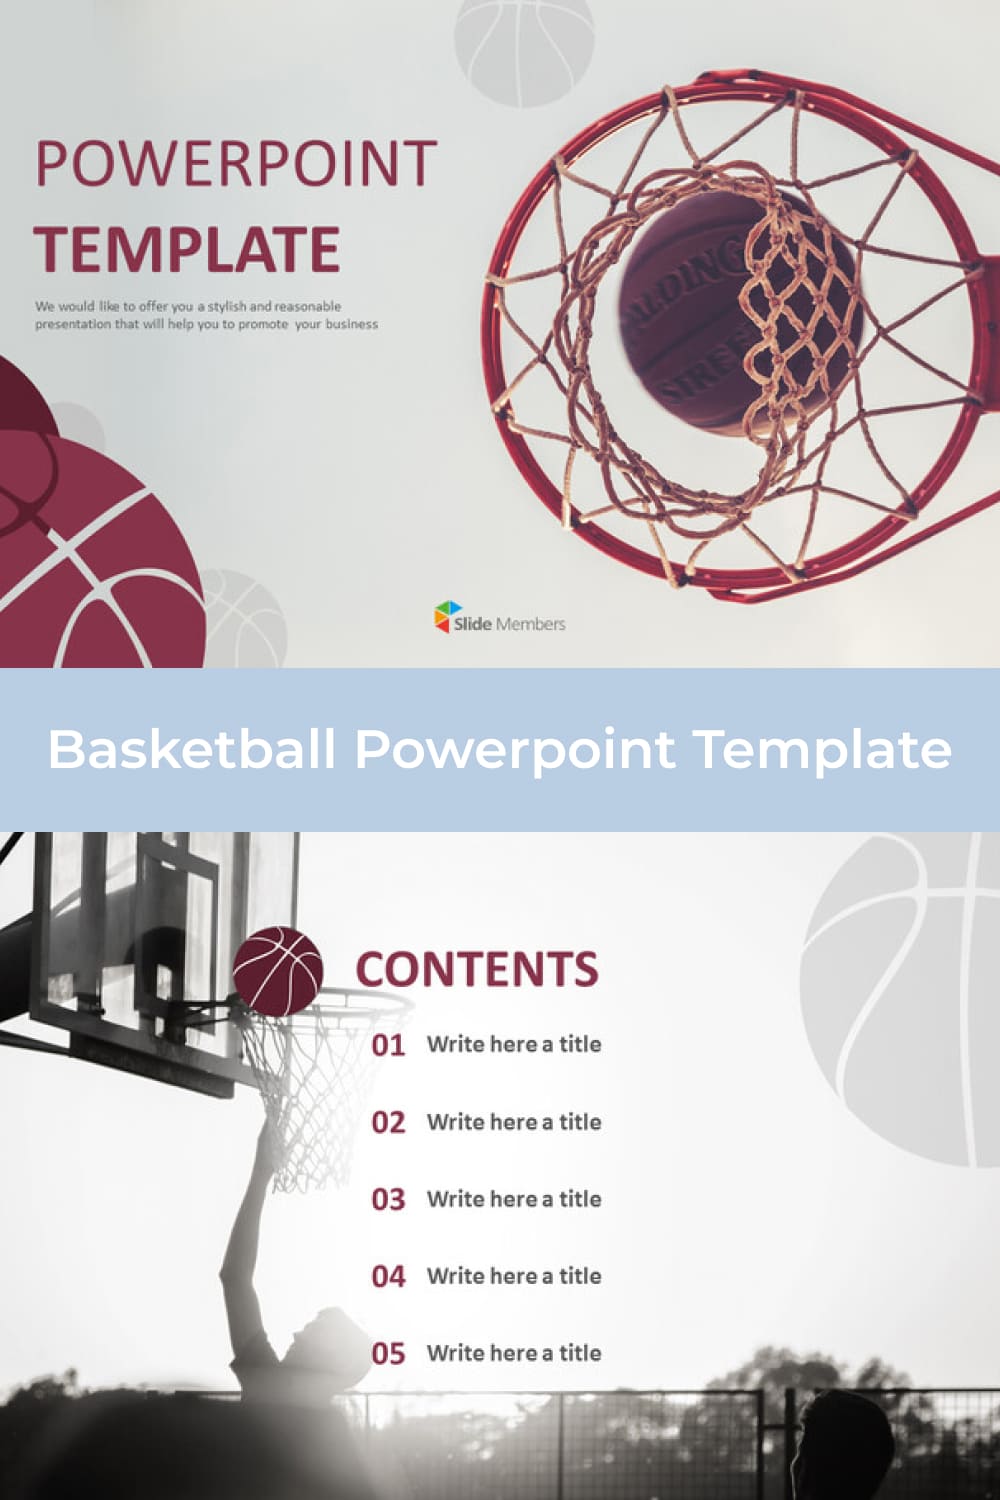 Basketball template with a picture of a ball ring.